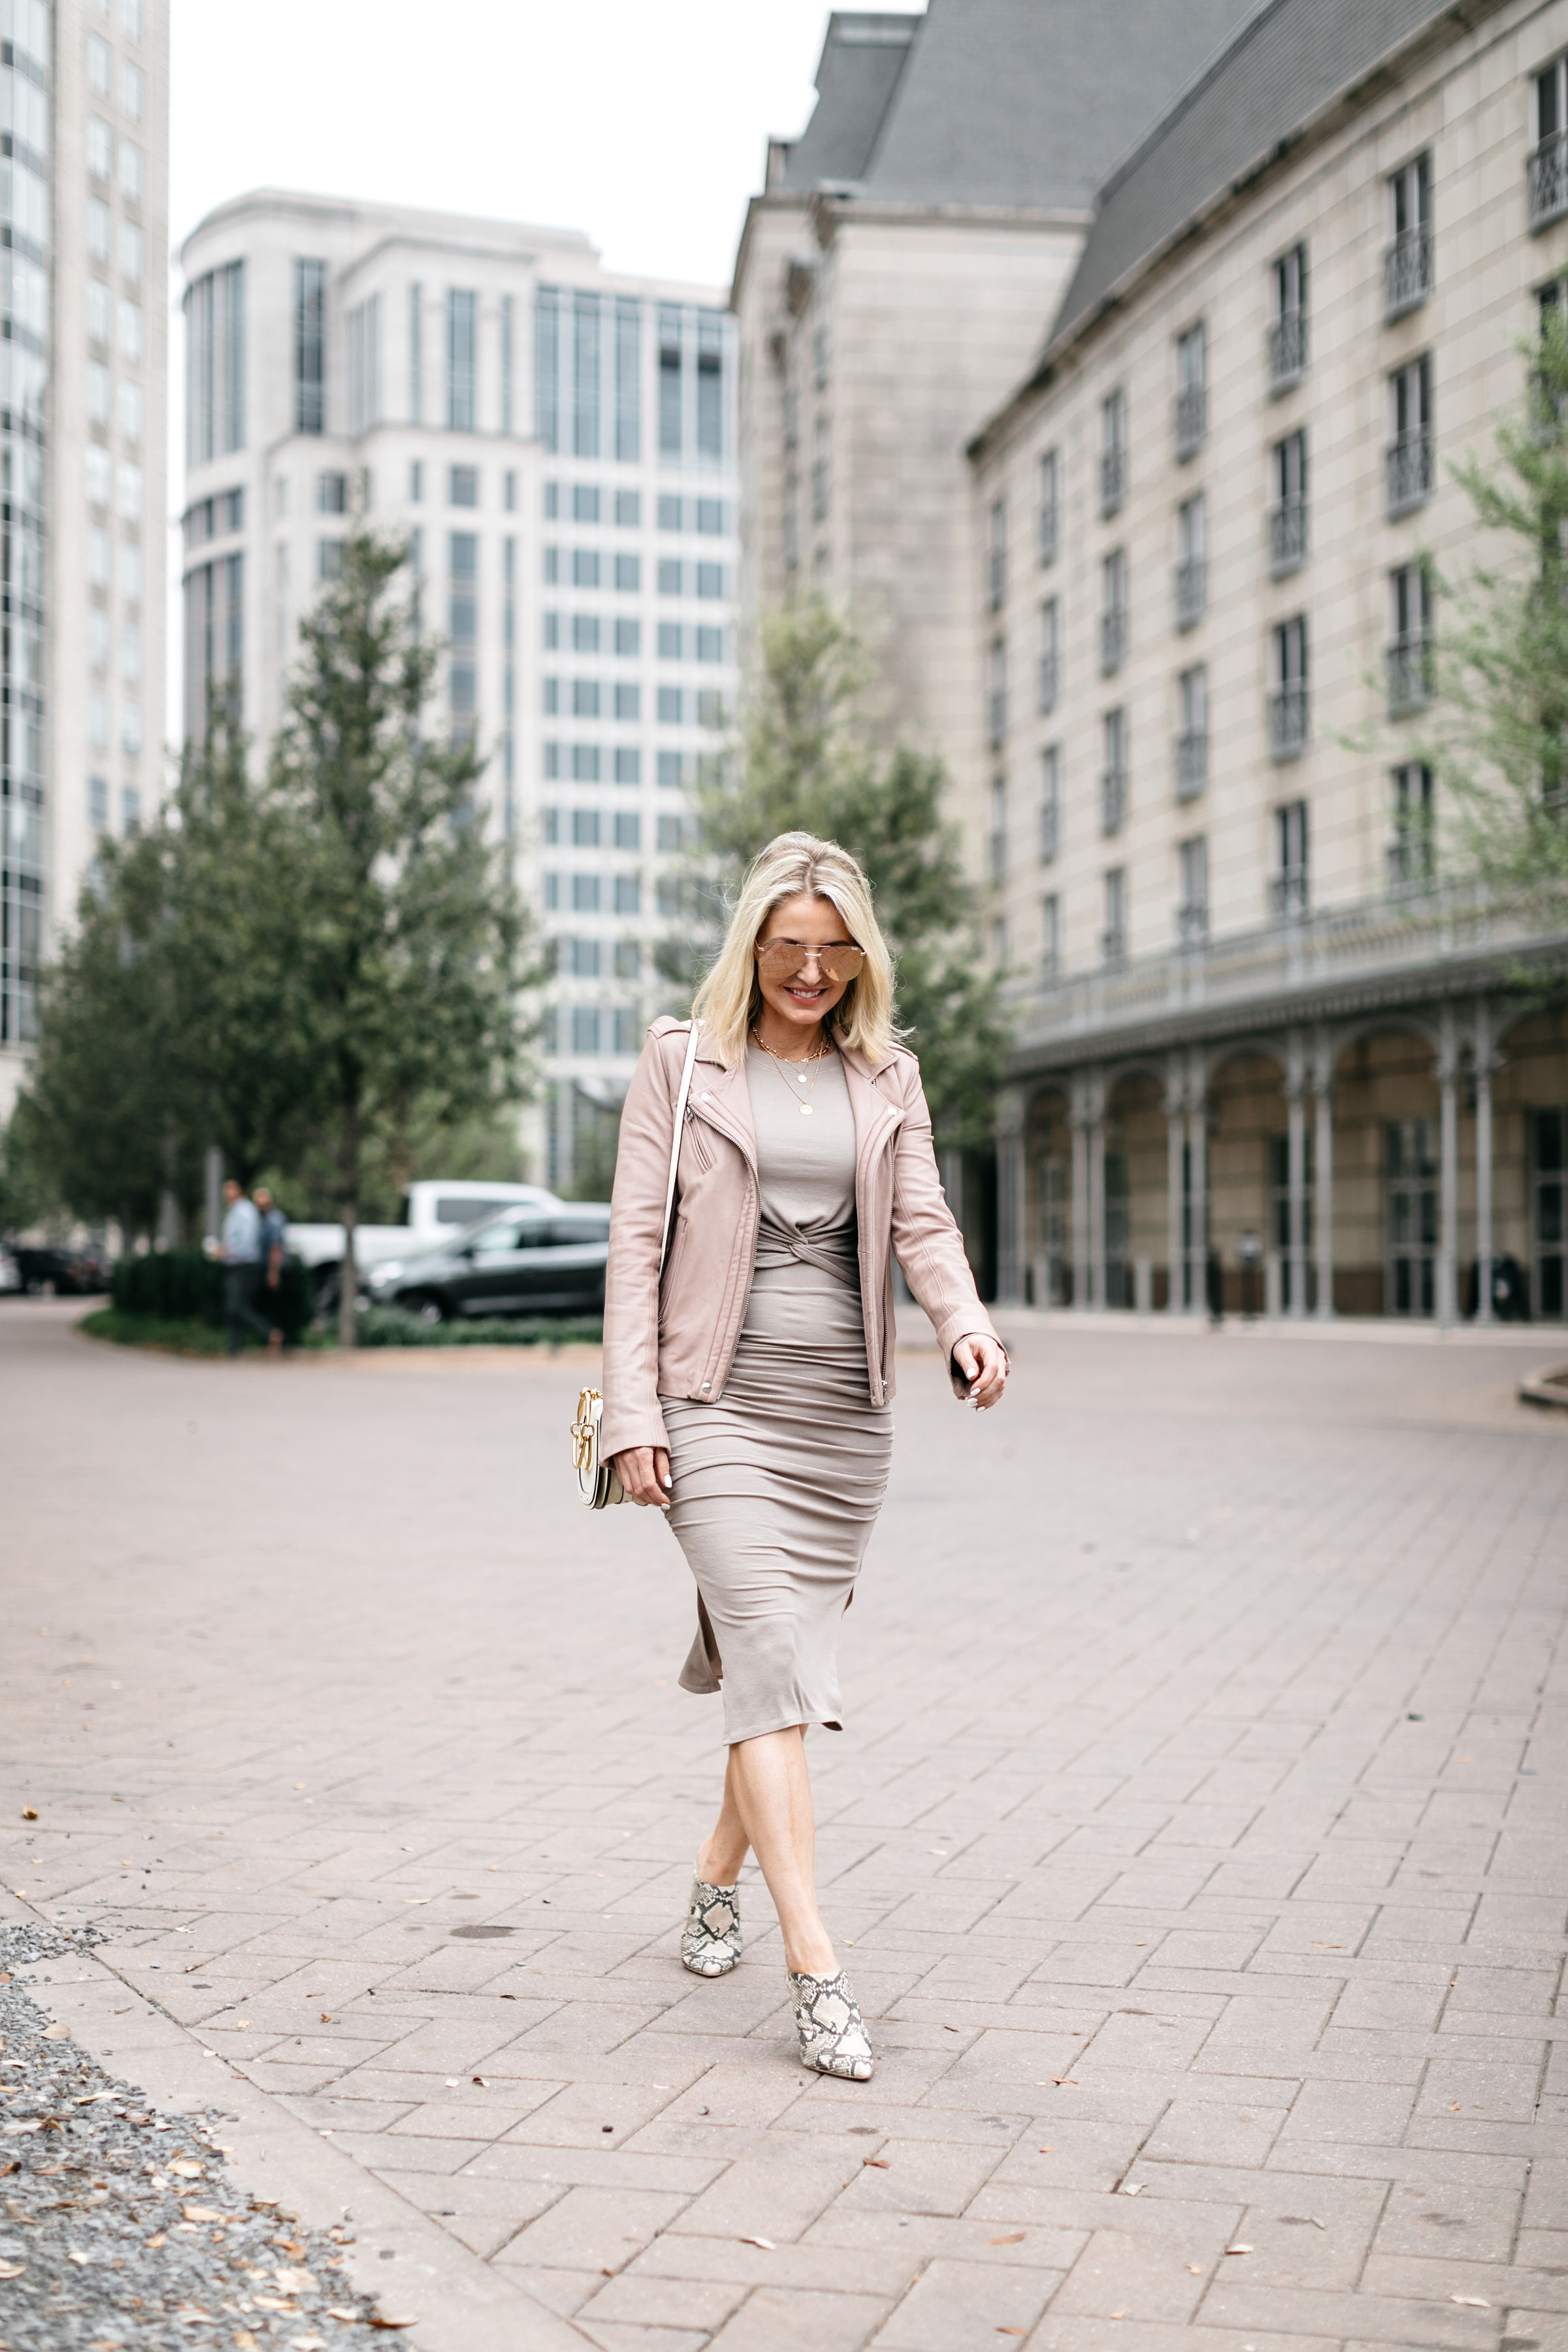 Reward Style Conference 2019, Fashion blogger over 40 Erin Busbee of BusbeeStyle.com wearing a fitted cropped long sleeve top and fitted midi skirt by Made LA from Revolve with an IRO blush leather jacket in Dallas, Texas